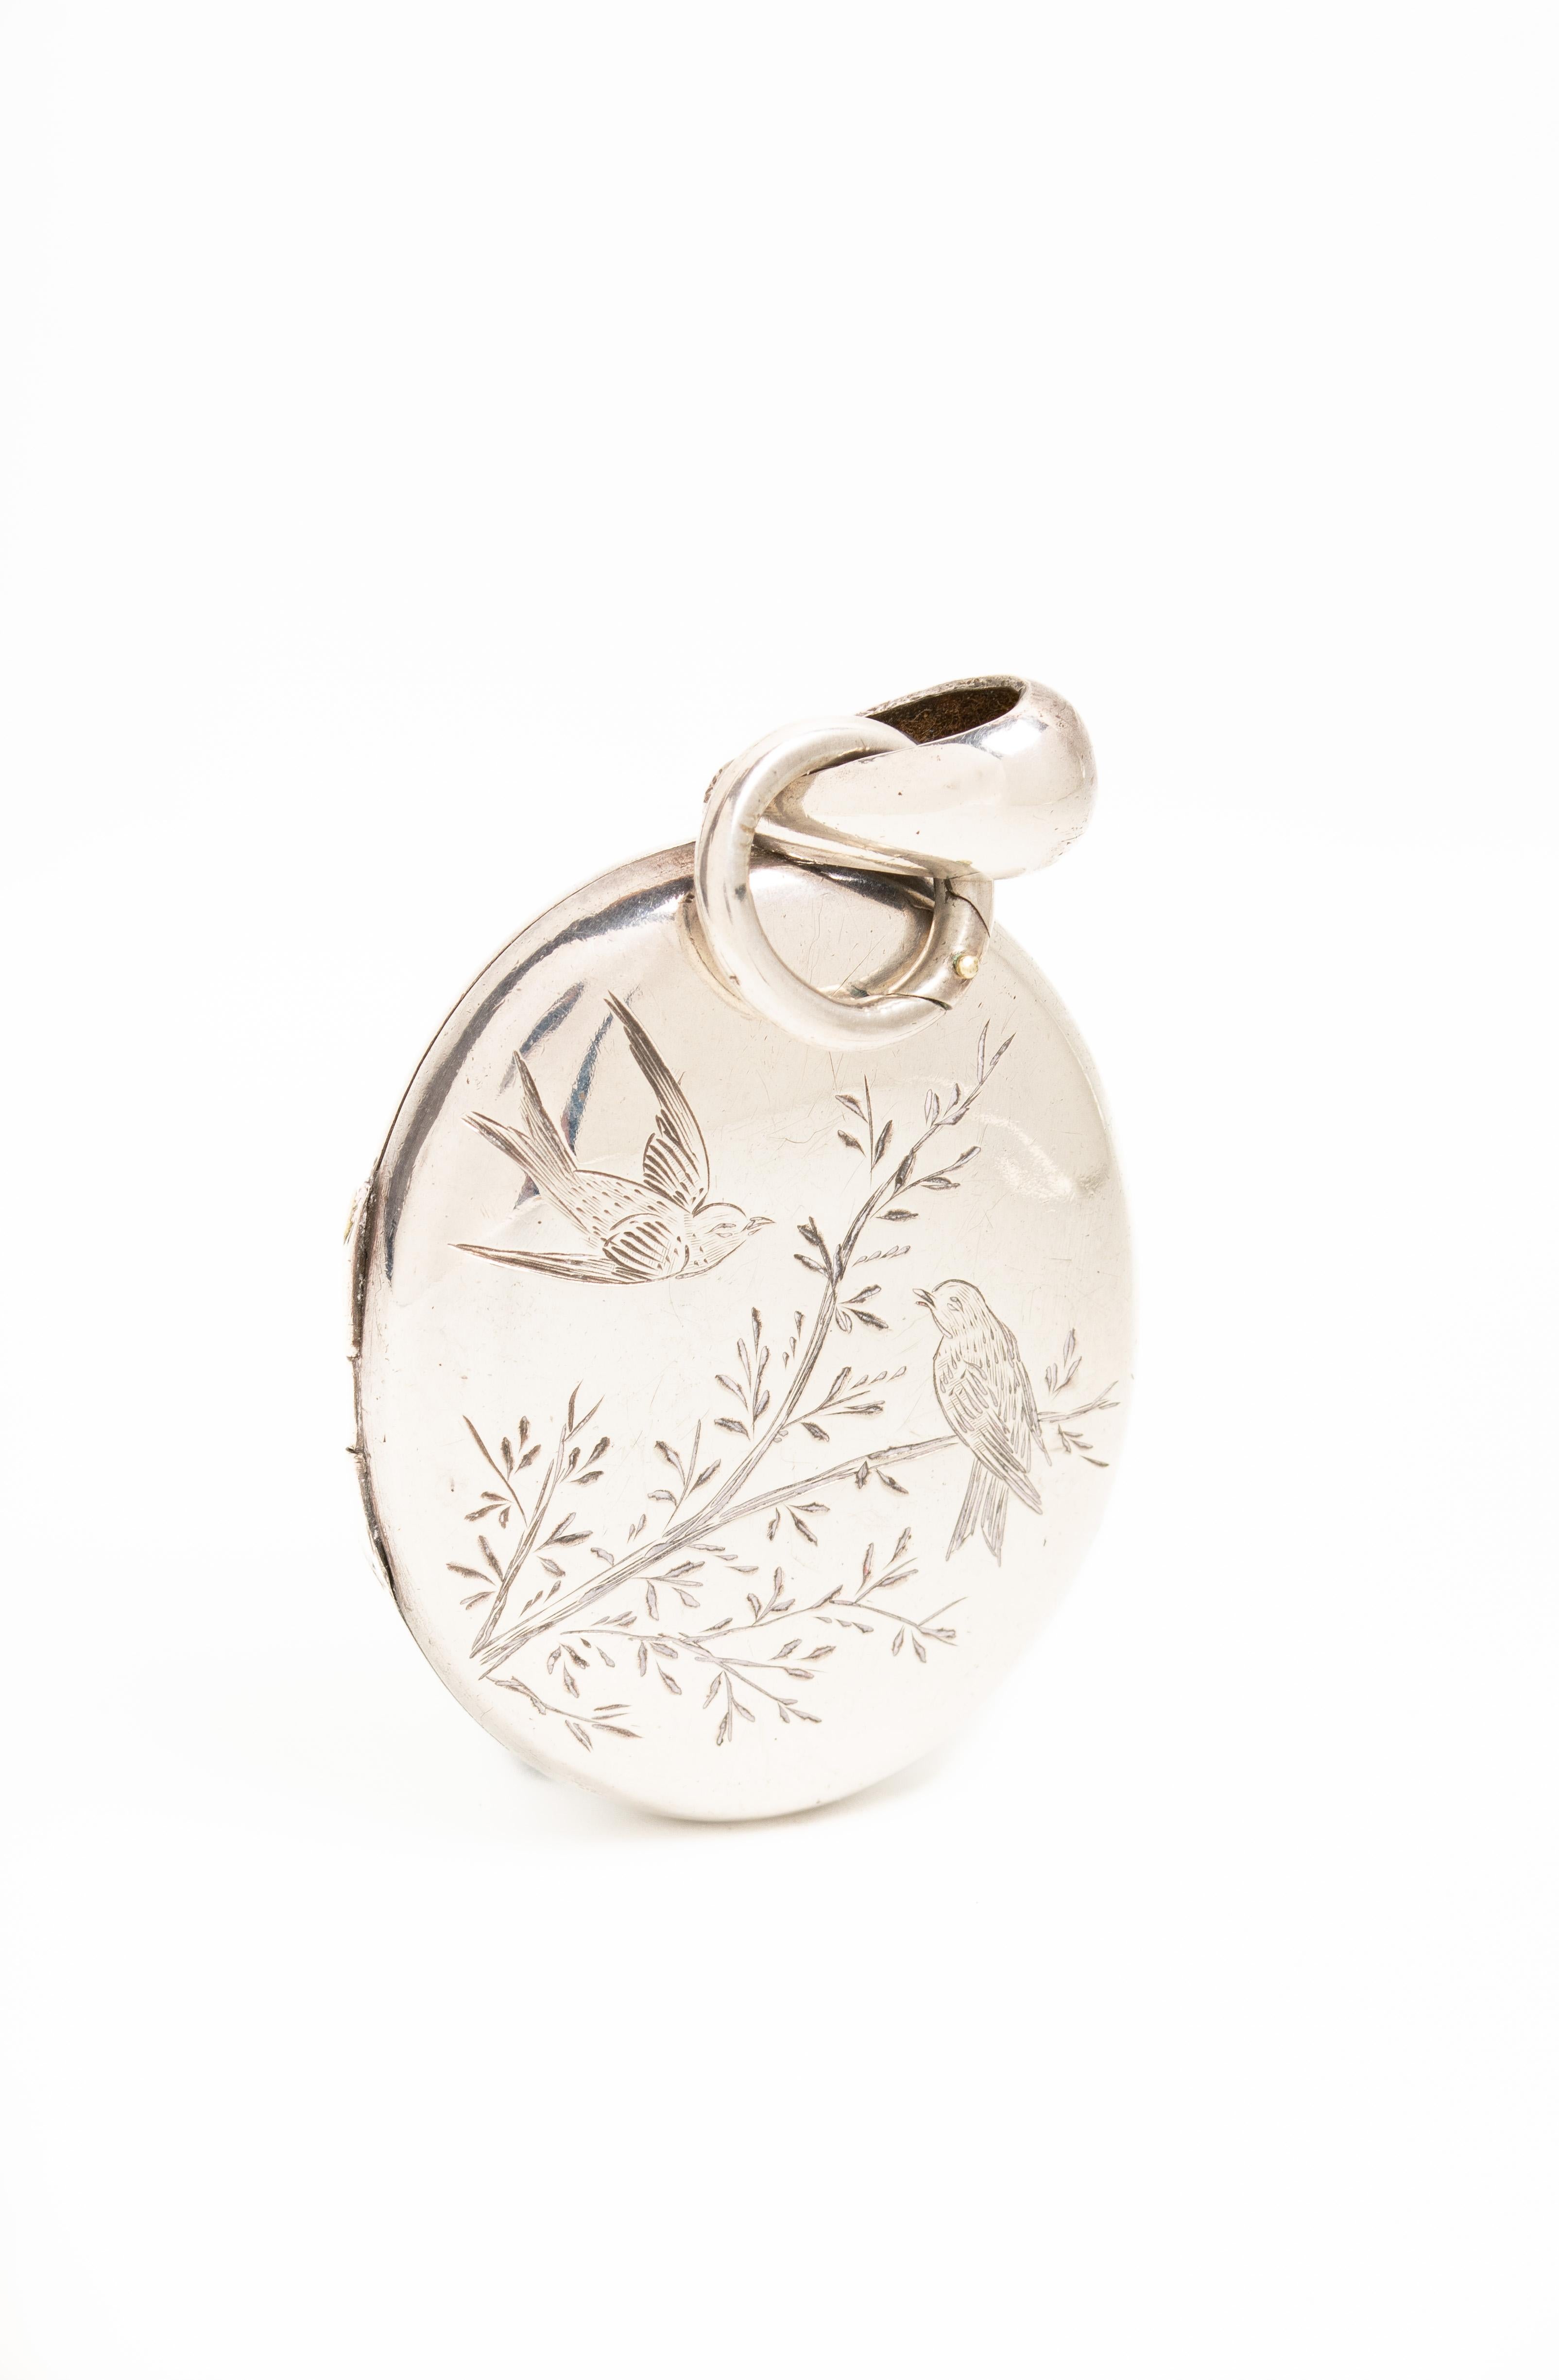 Victorian Aesthetic Movement Silver Locket With A Pair Of Swallows In Good Condition For Sale In Portland, England